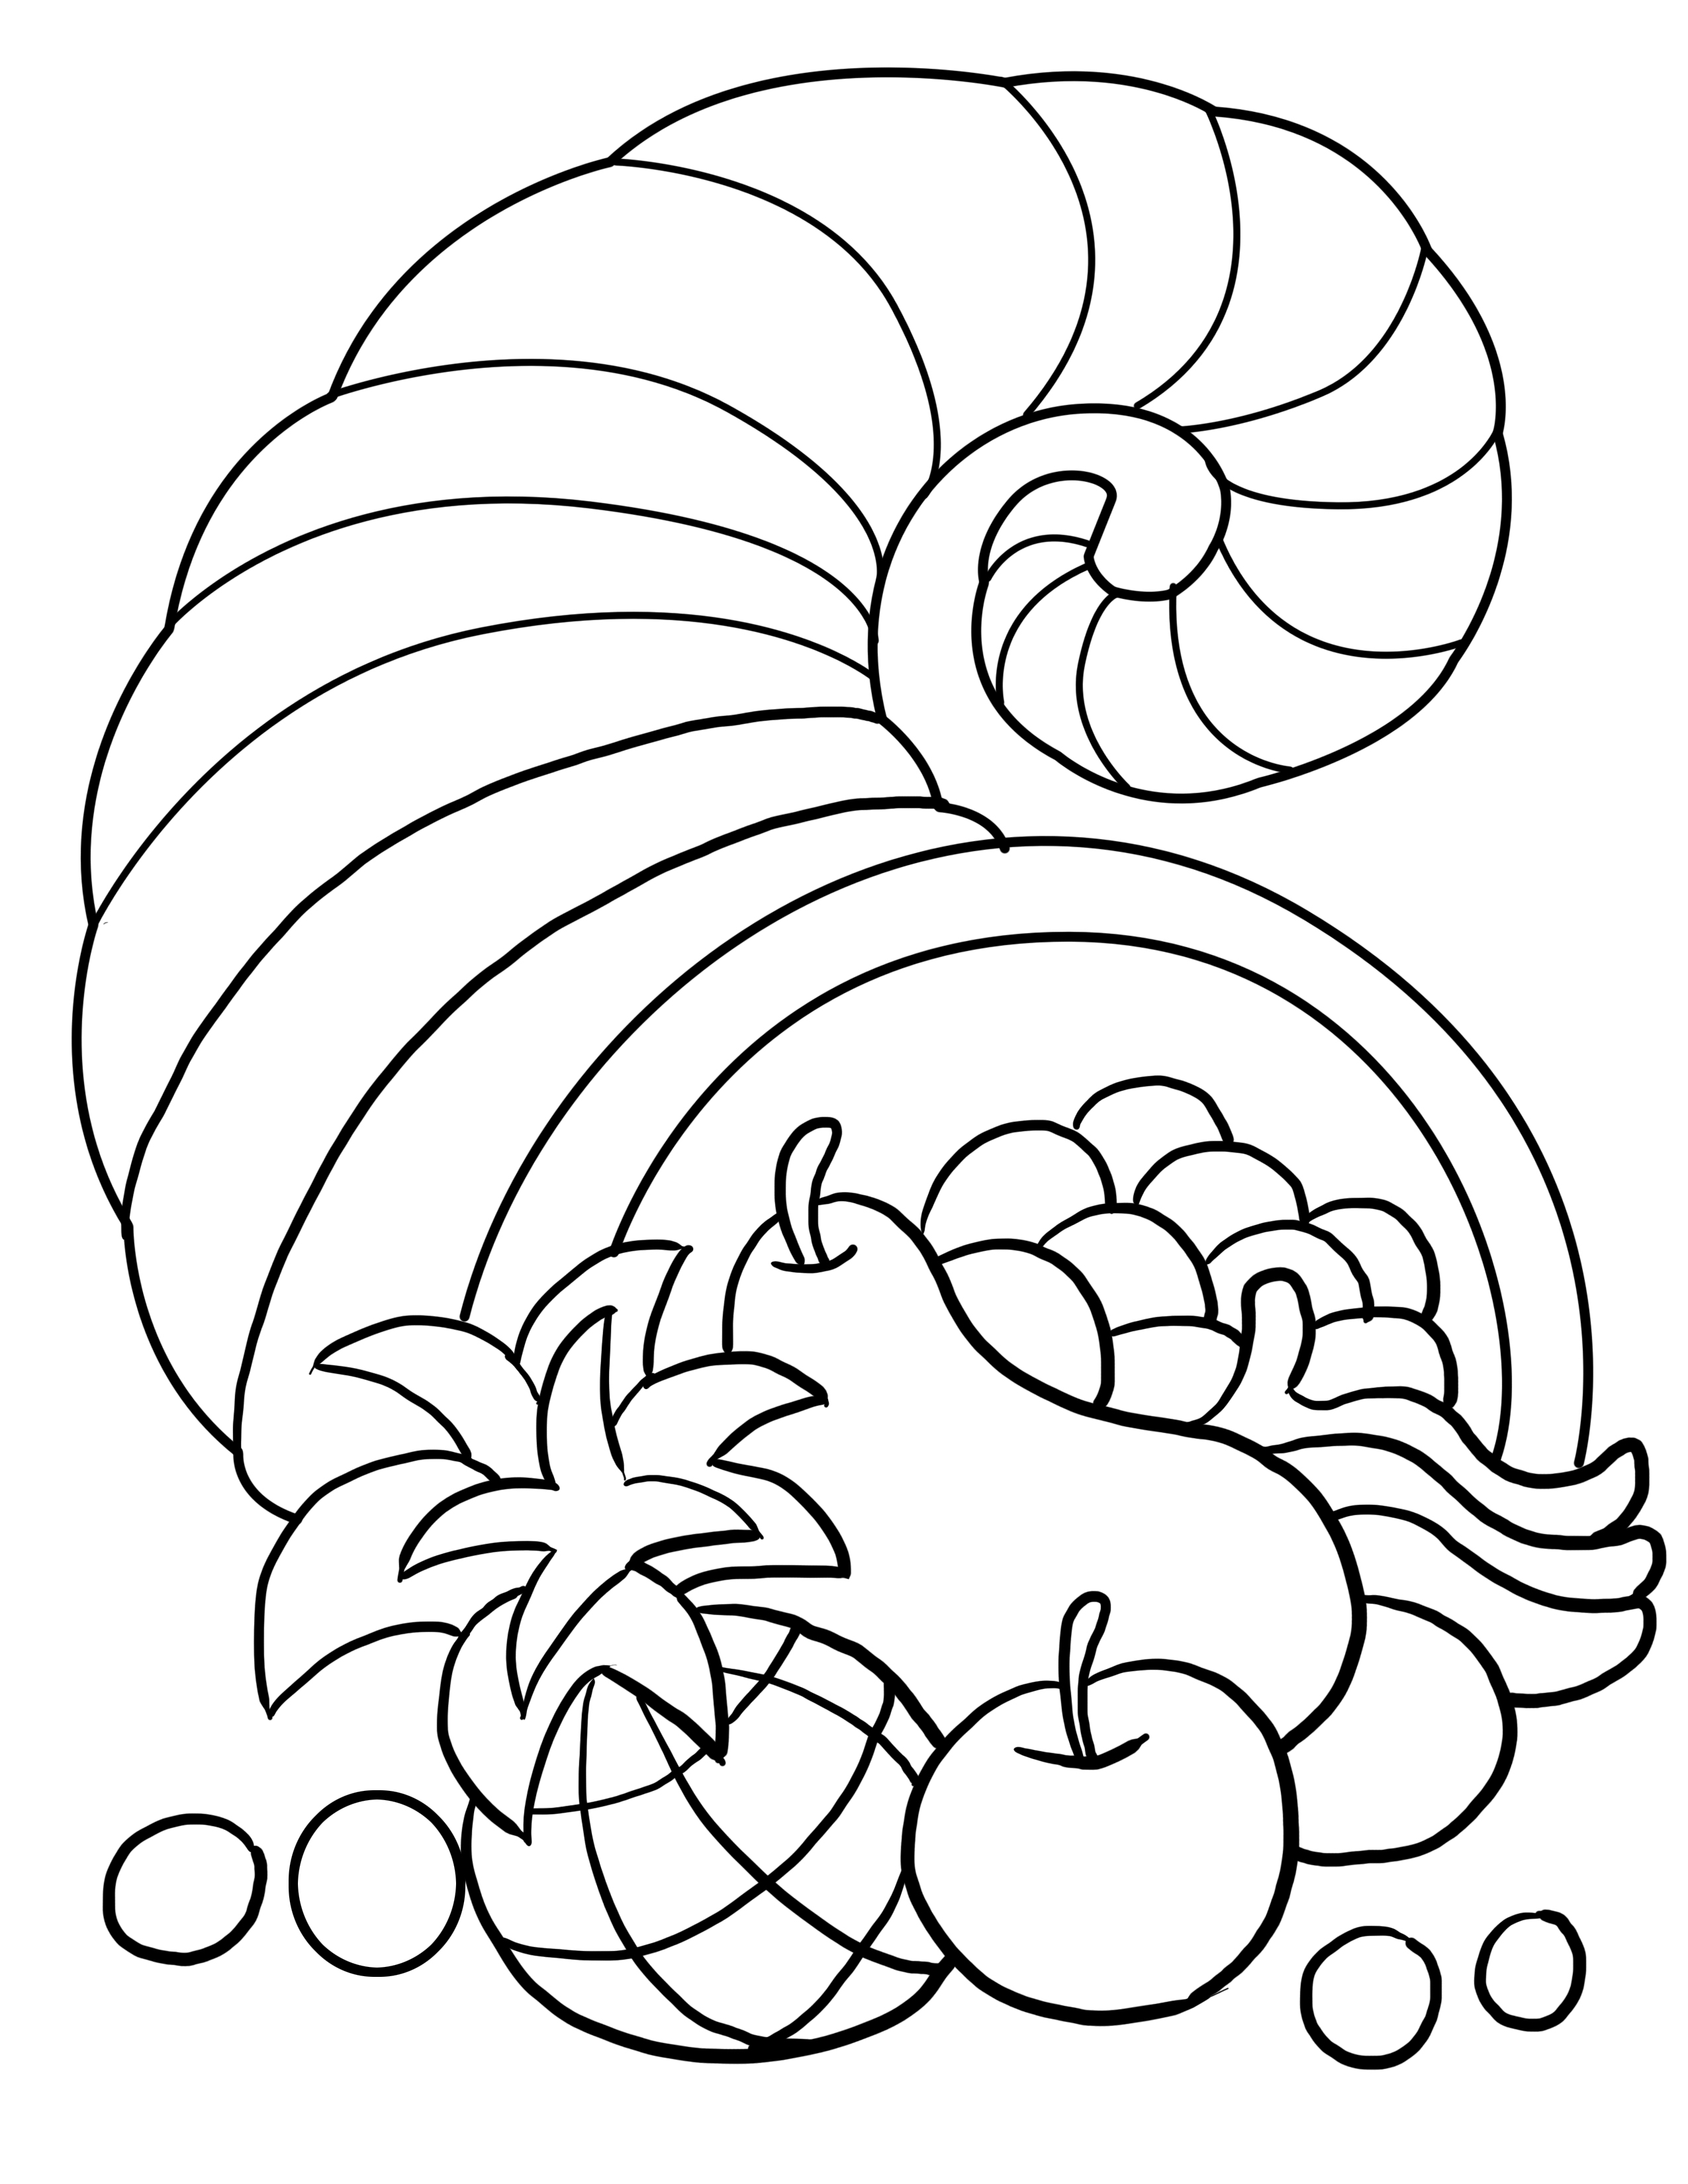 November Printable Coloring Pages - Printable Word Searches